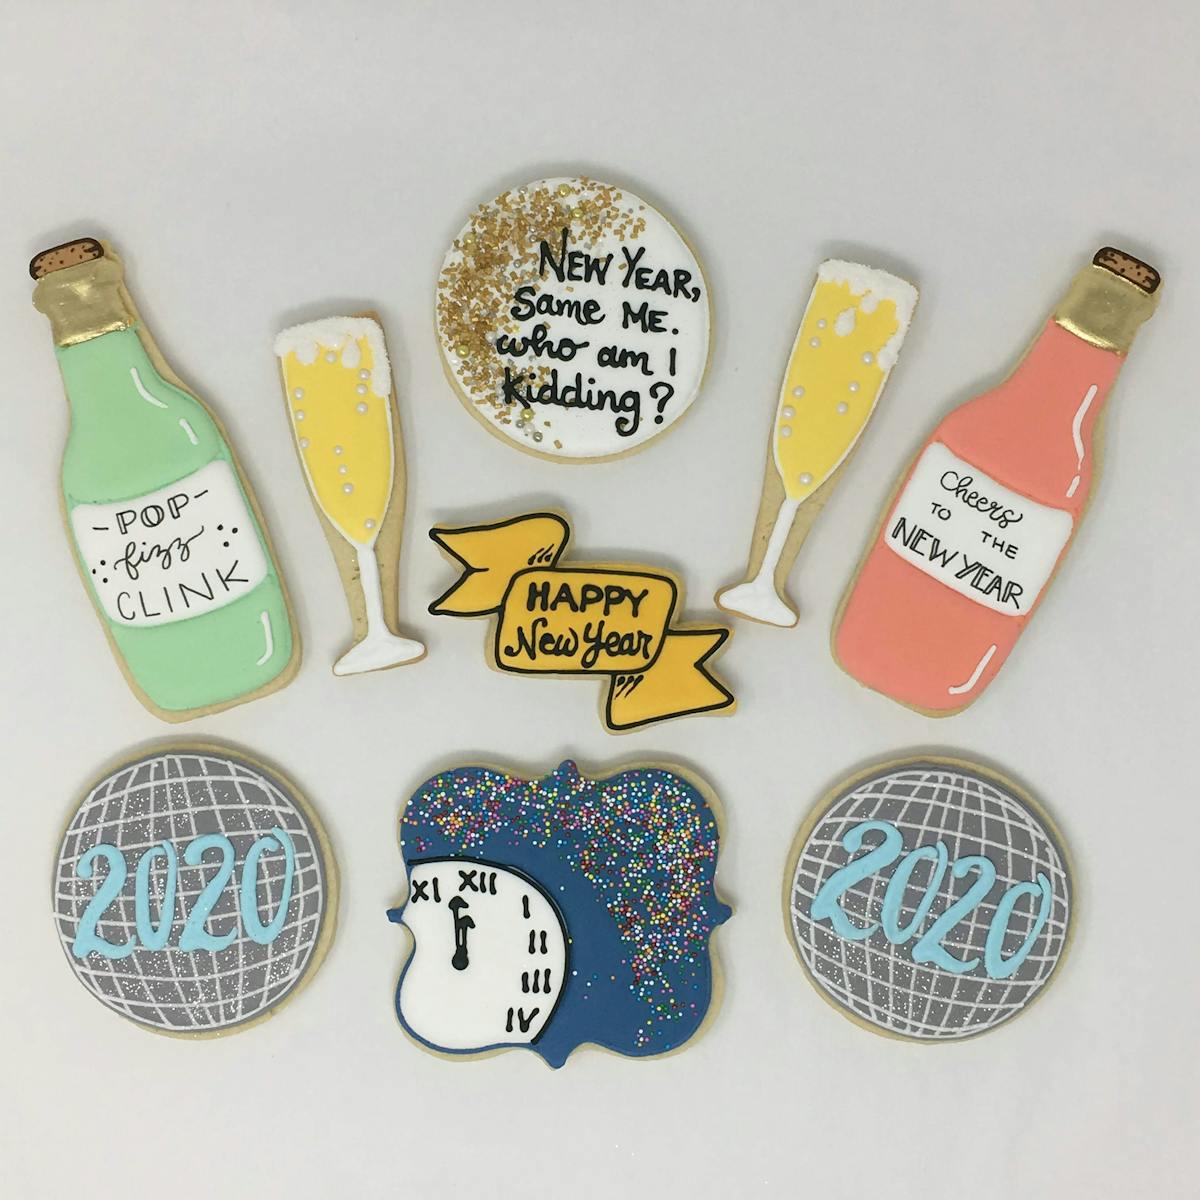 a group of new years themed cookies - champagne bottle, champagne flute, banner, clock, new year's ball